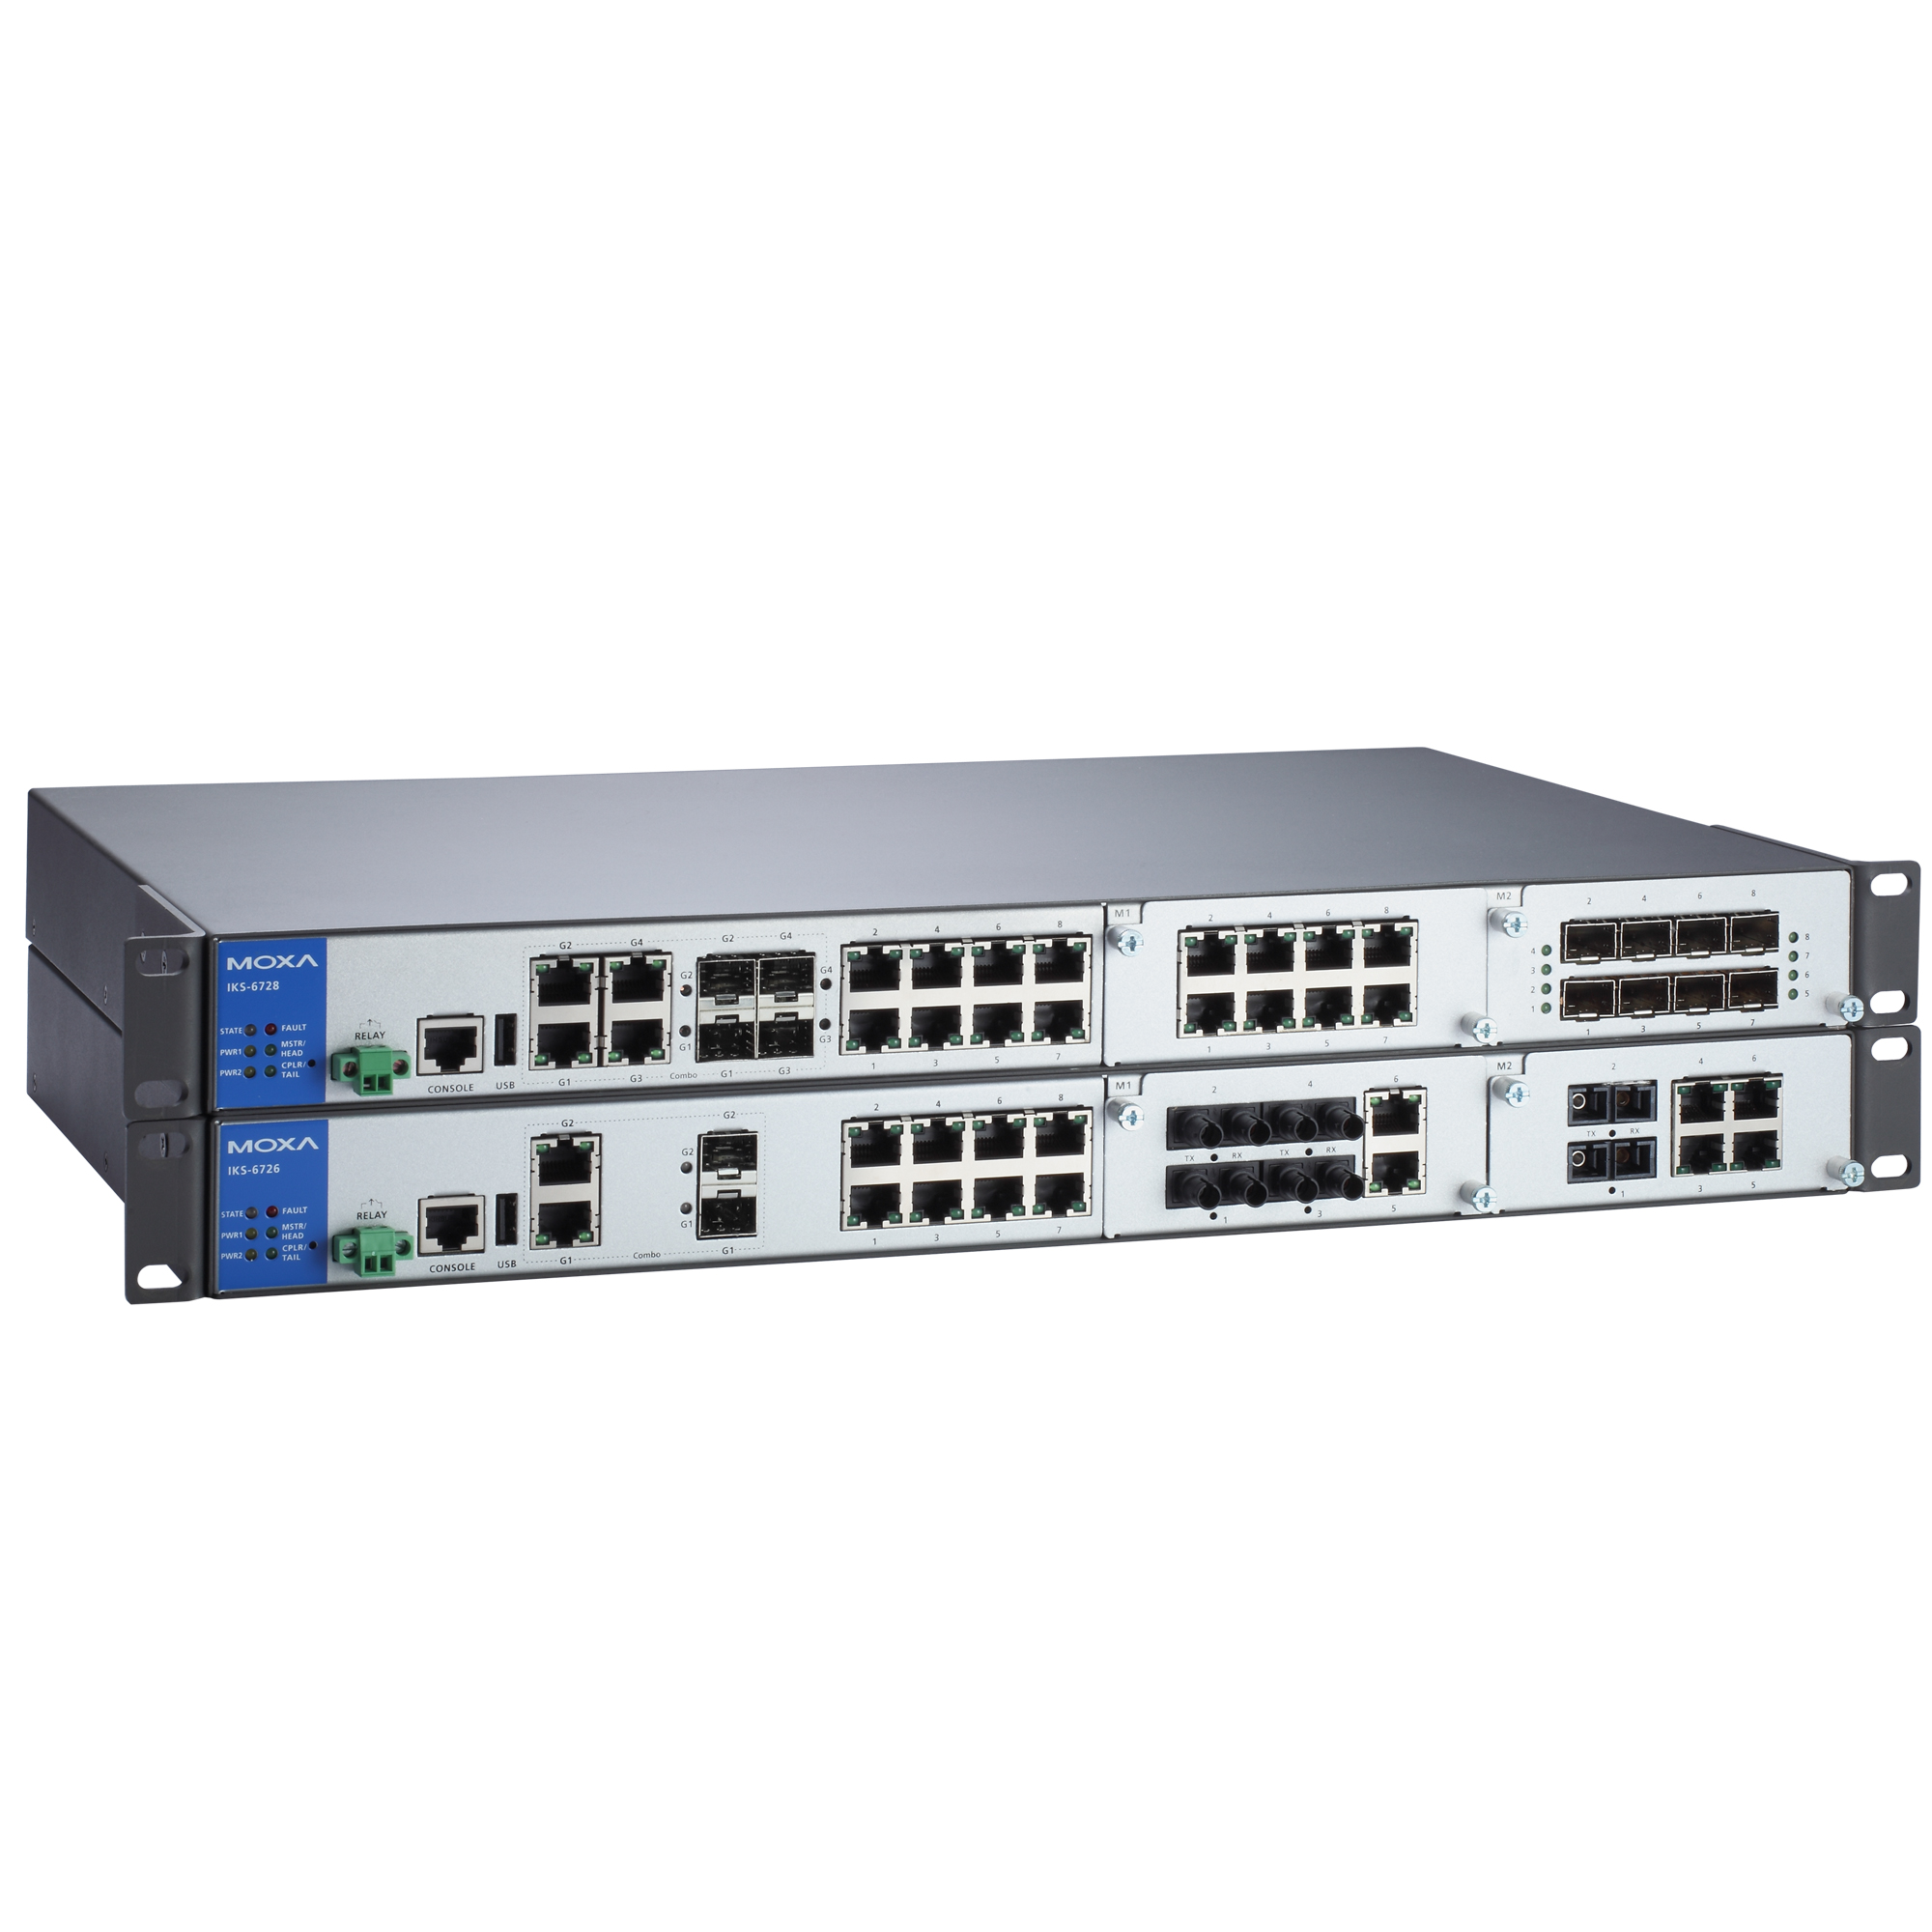 IKS-6726-2GTXSFP/IKS-6728-4GTXSFP Series - Phased-out Products | MOXA